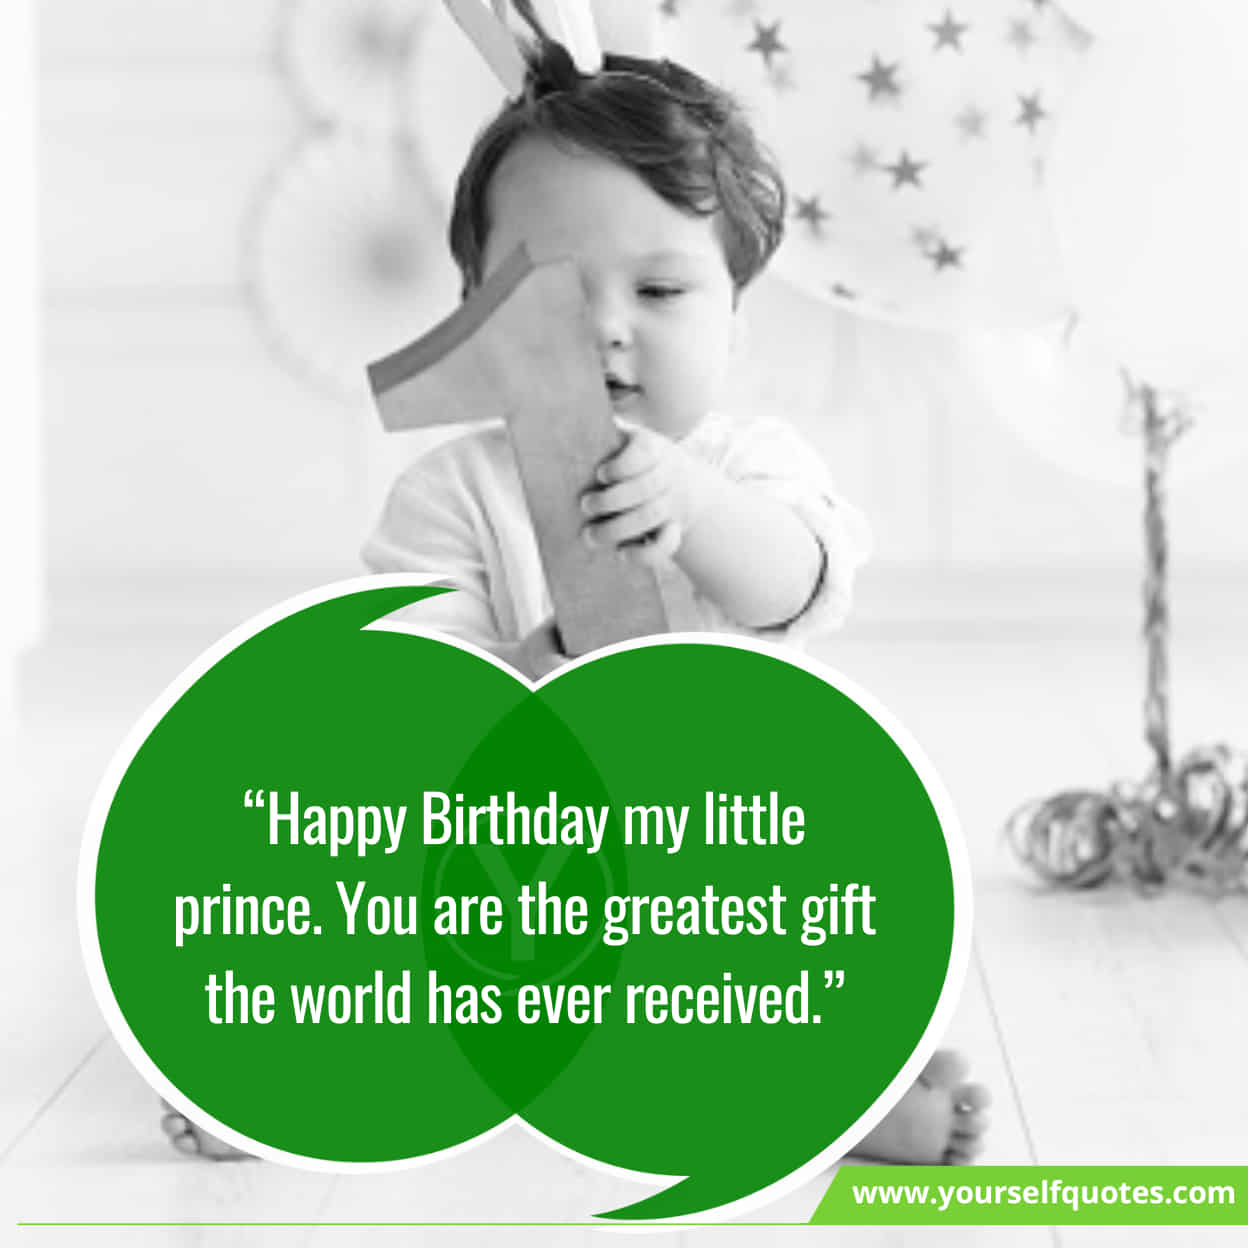 Heart-Warming Birthday Wishes For Baby Boy 